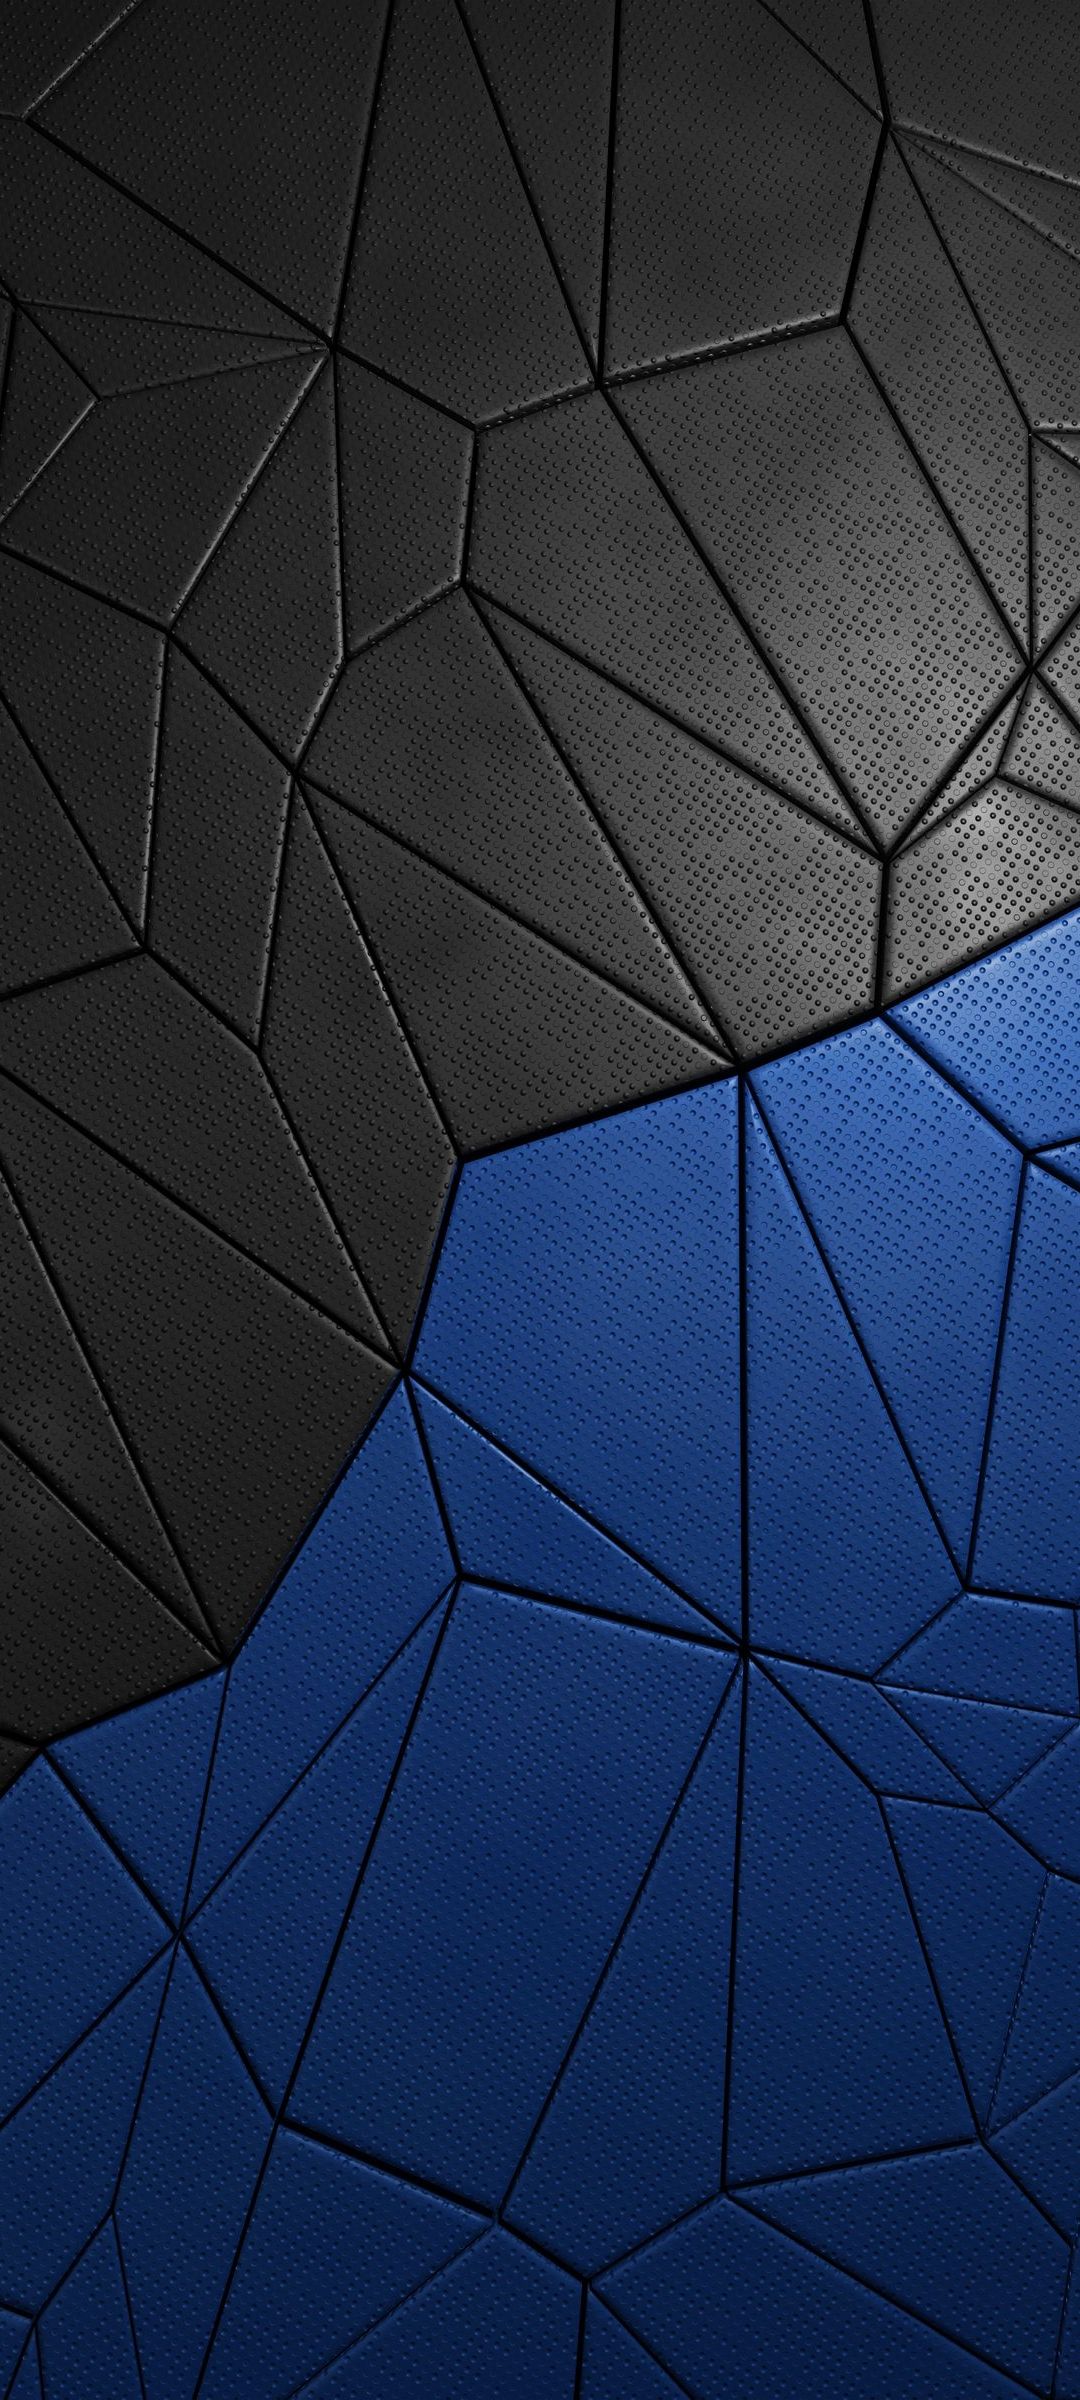 Aggregate 74+ black and blue wallpaper best - in.cdgdbentre